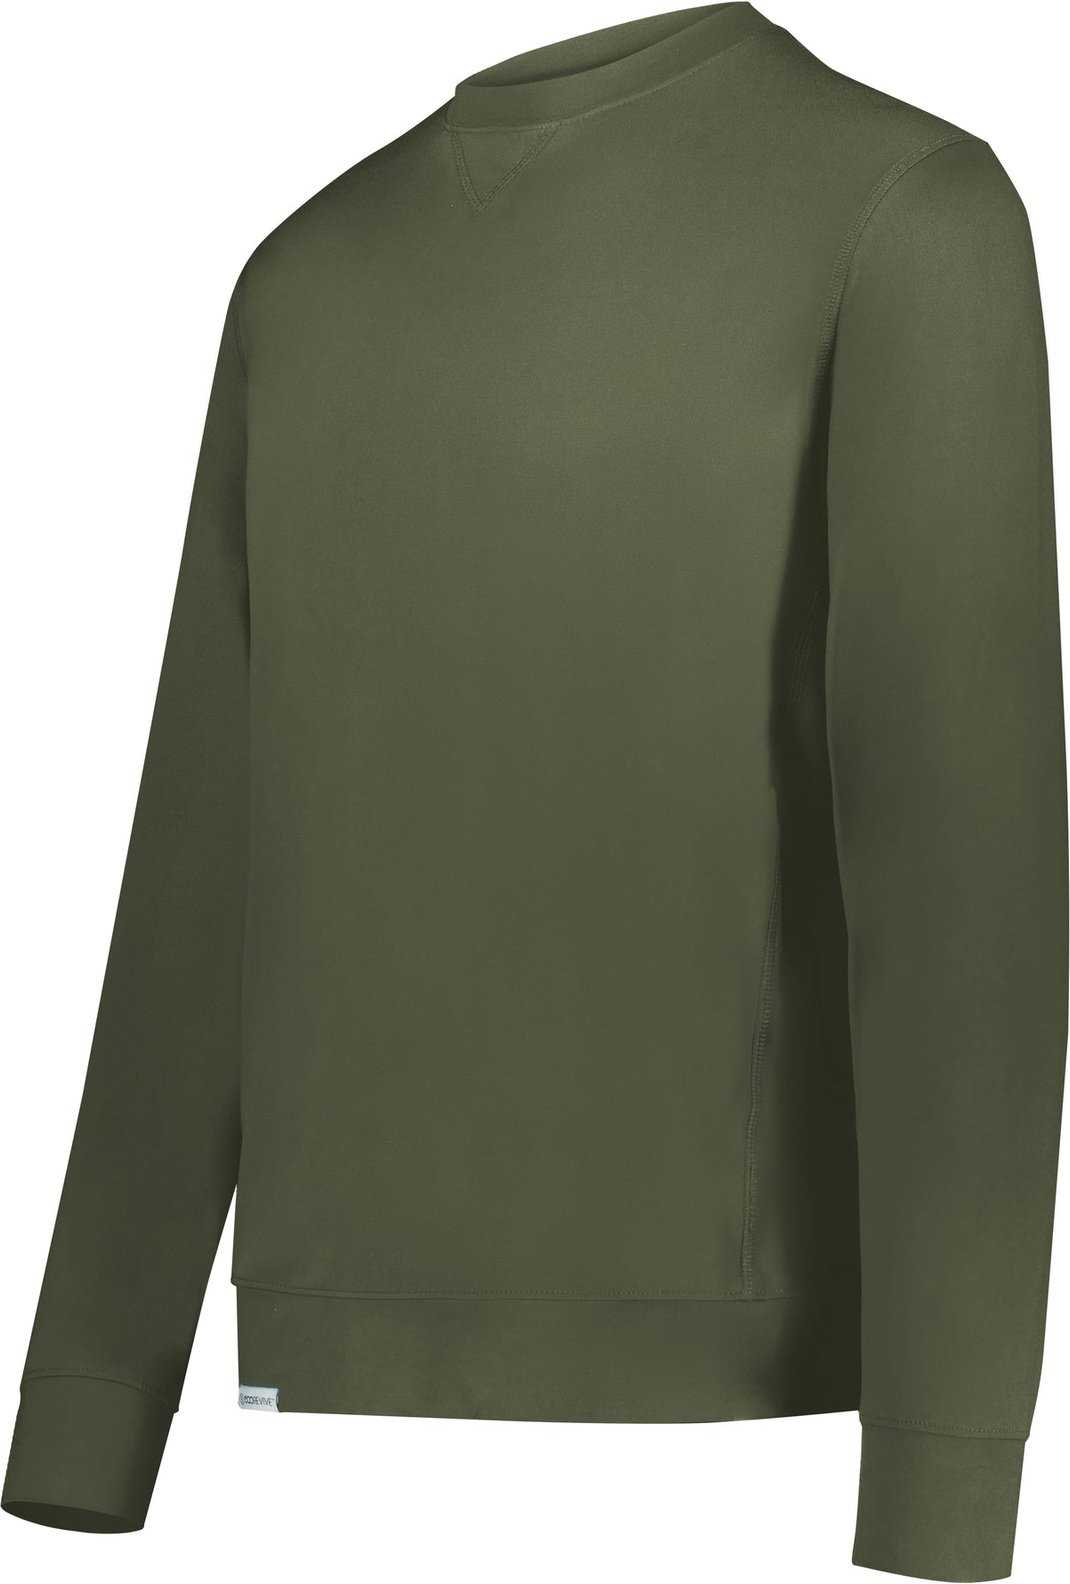 Holloway 223503 Ventura Soft Knit Crew - Olive - HIT a Double